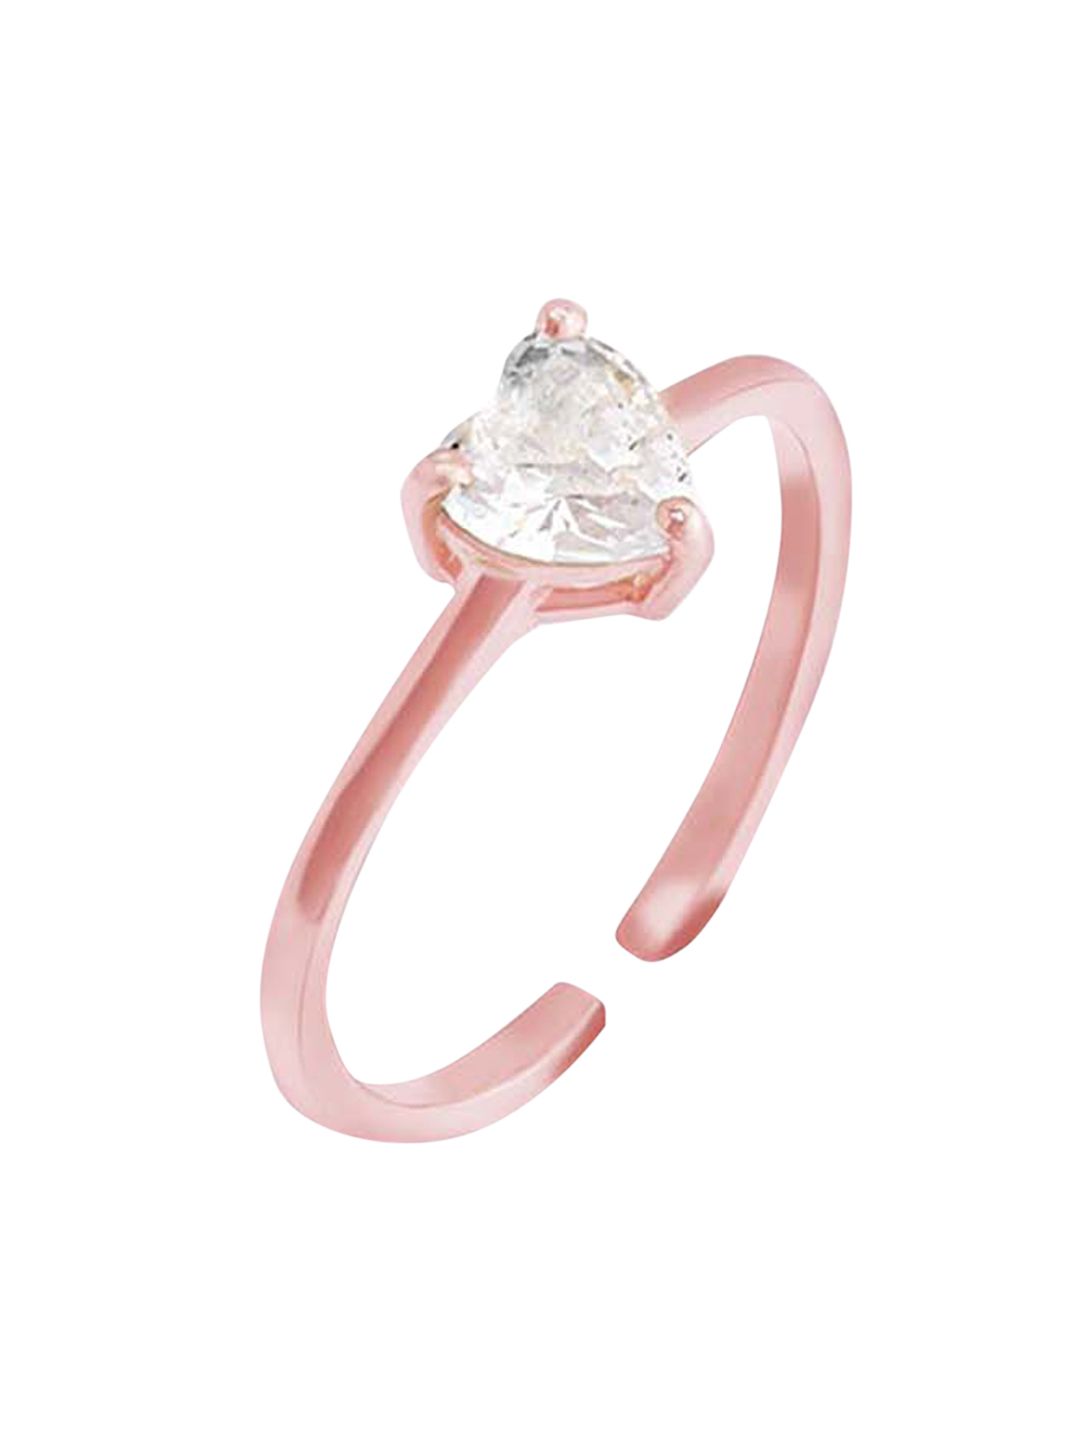 GIVA 925 Sterling Silver Rose Gold-Plated & CZ Studded Finger Ring Price in India